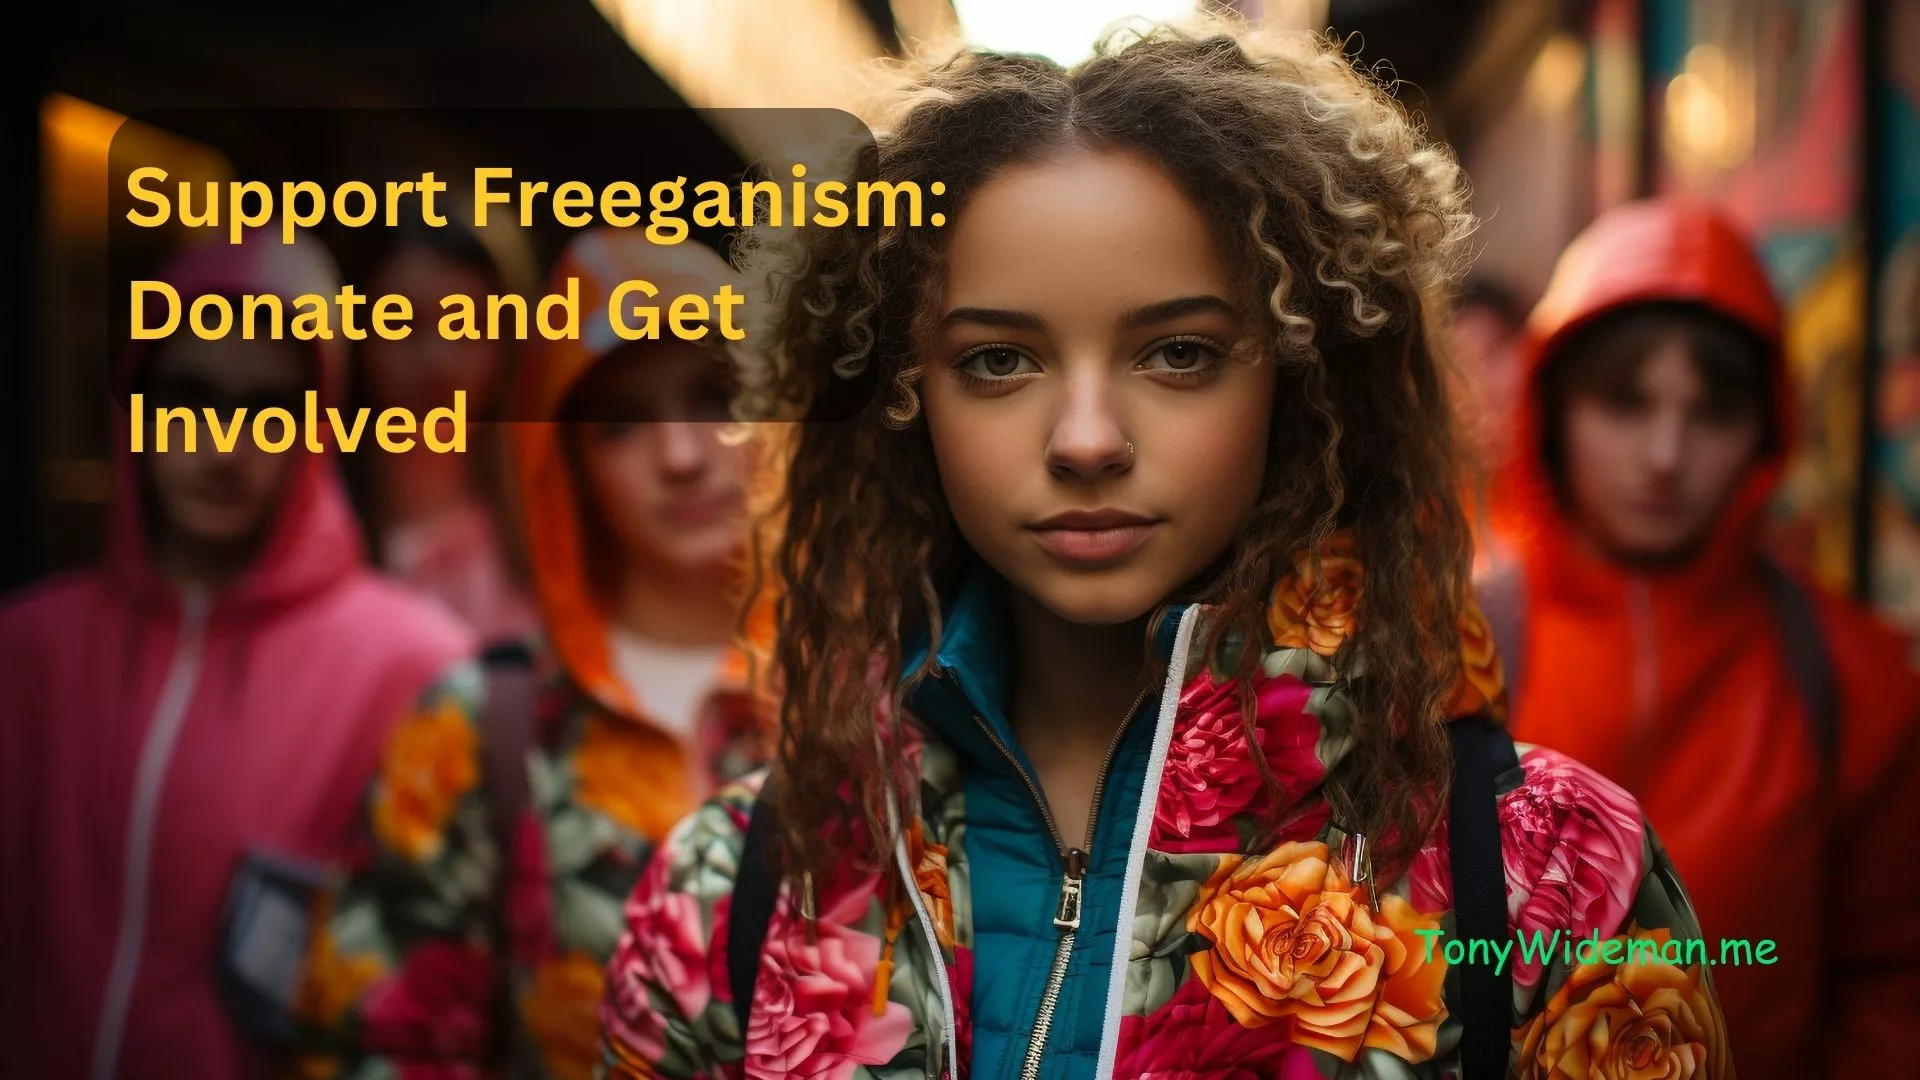 Support Freeganism: Donate and Get Involved